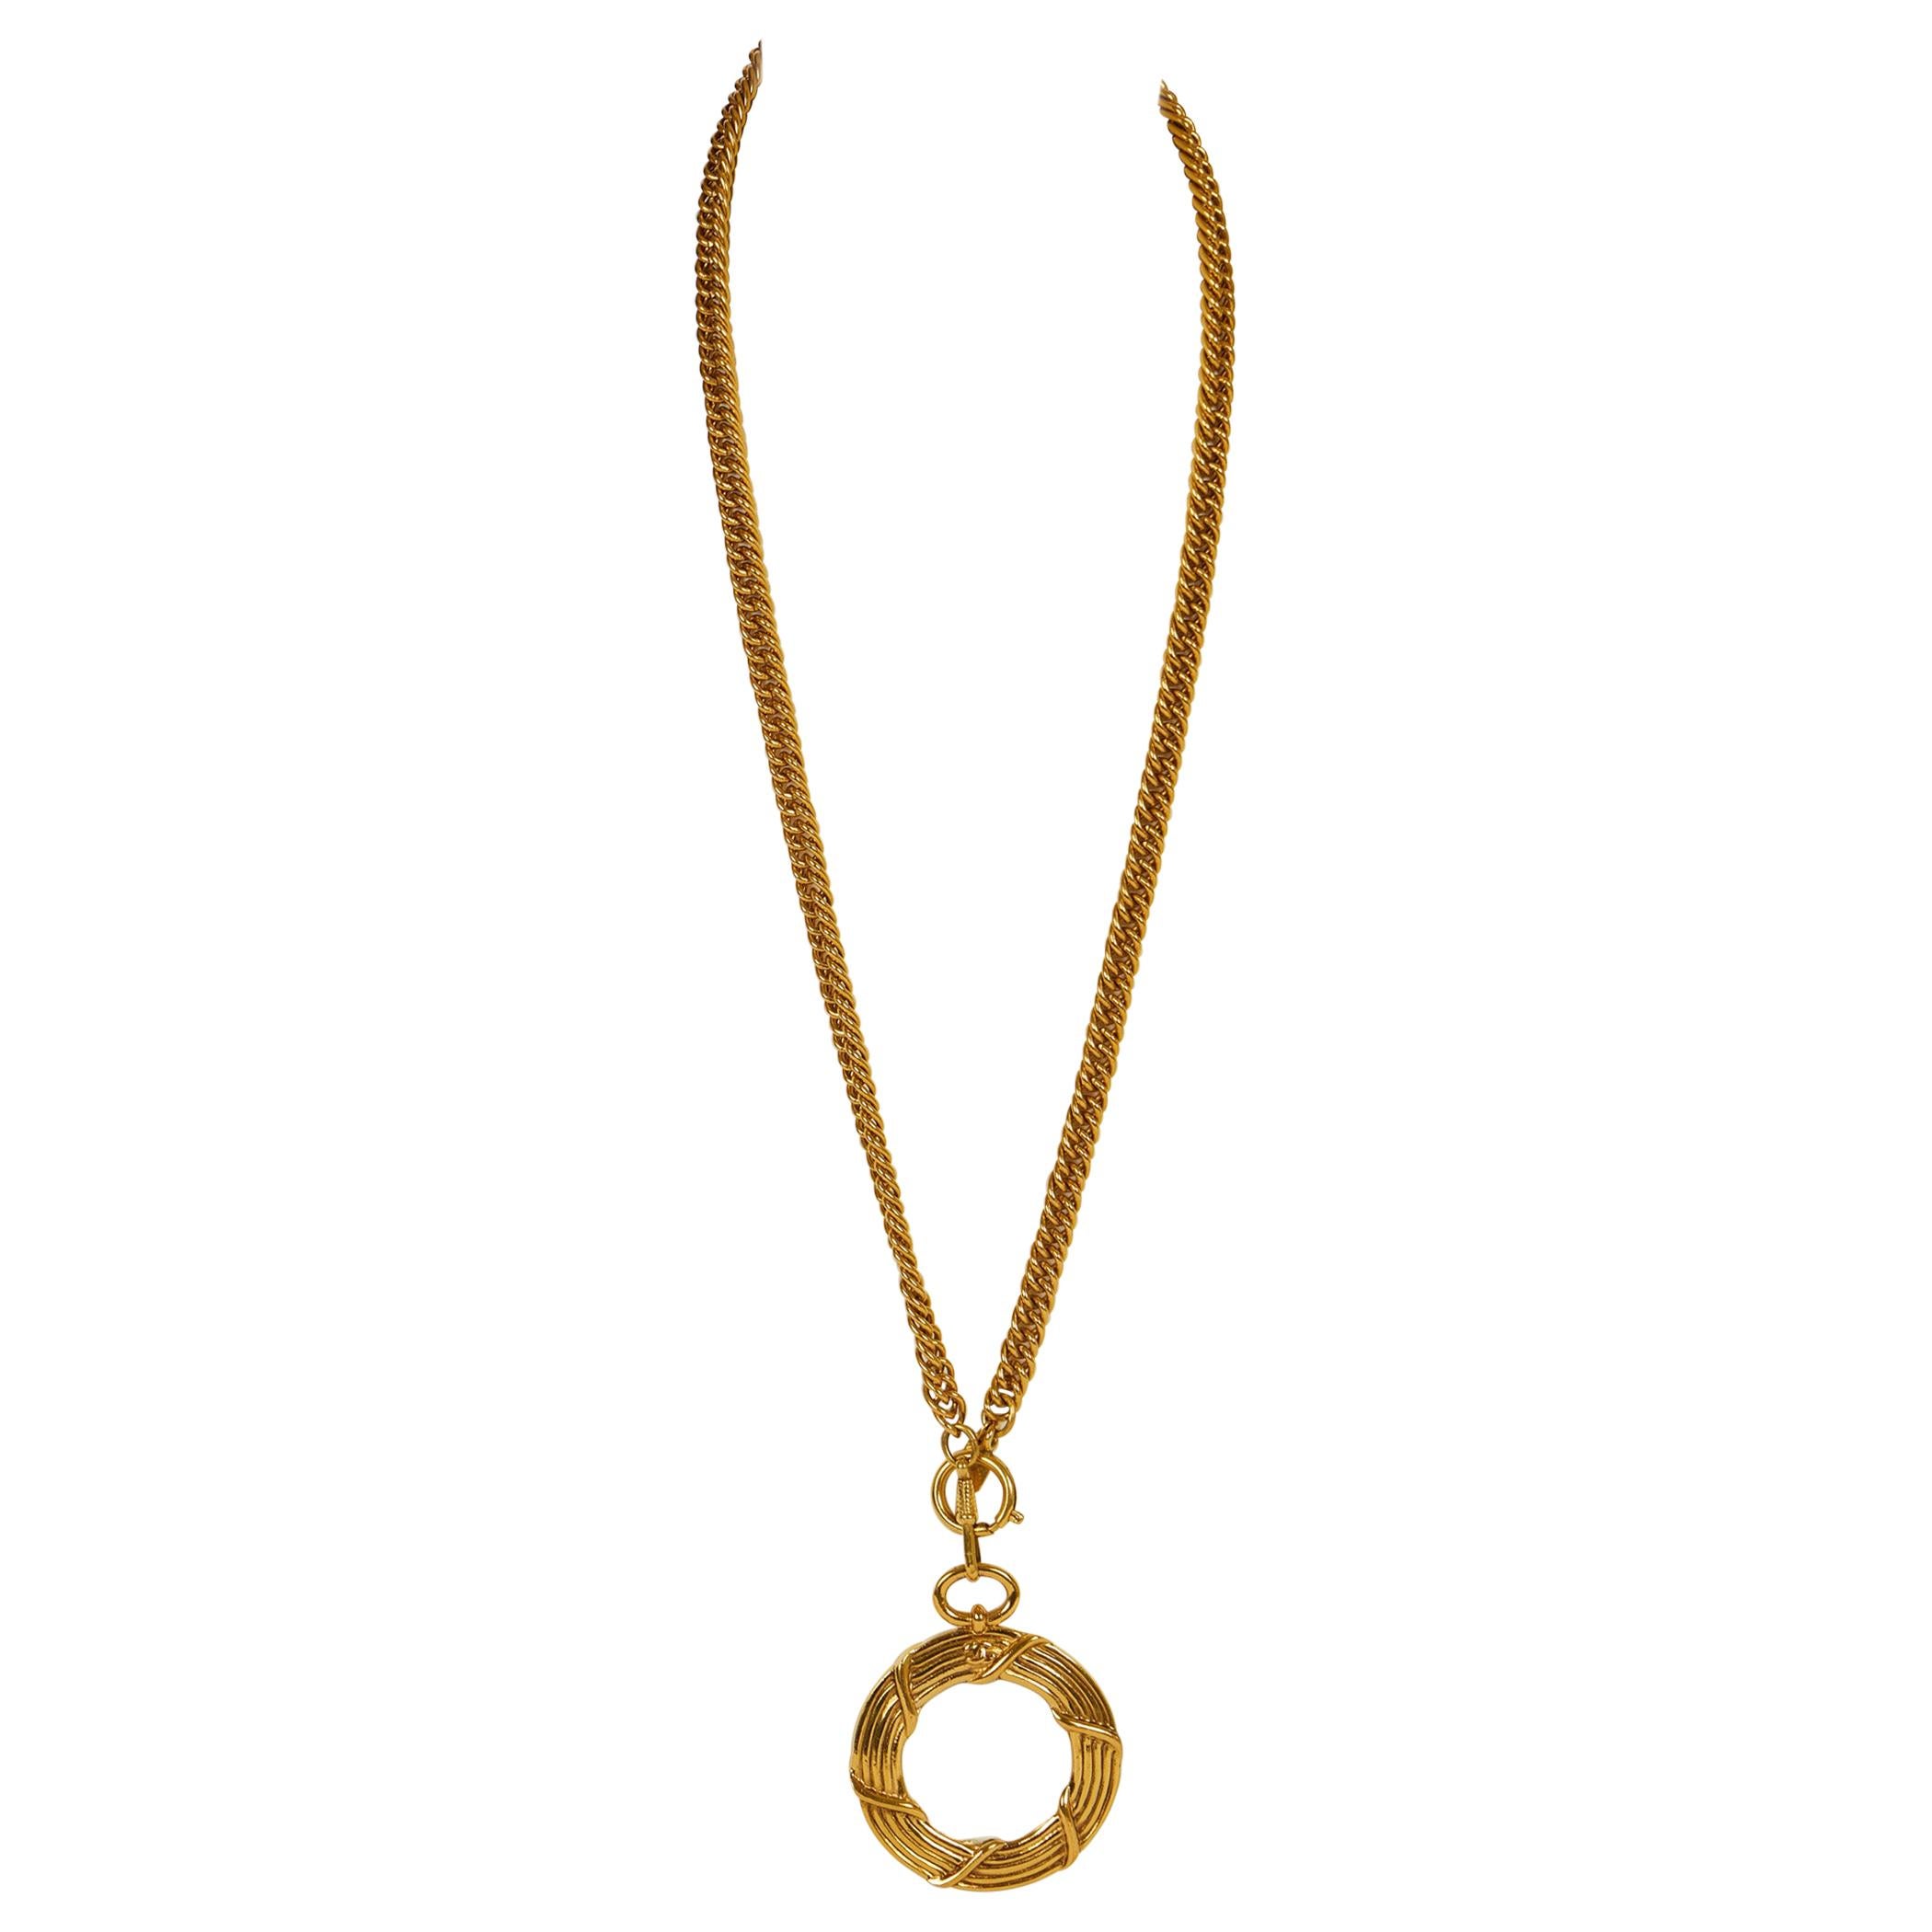 1980s Chanel Magnifier Gold Chain Necklace